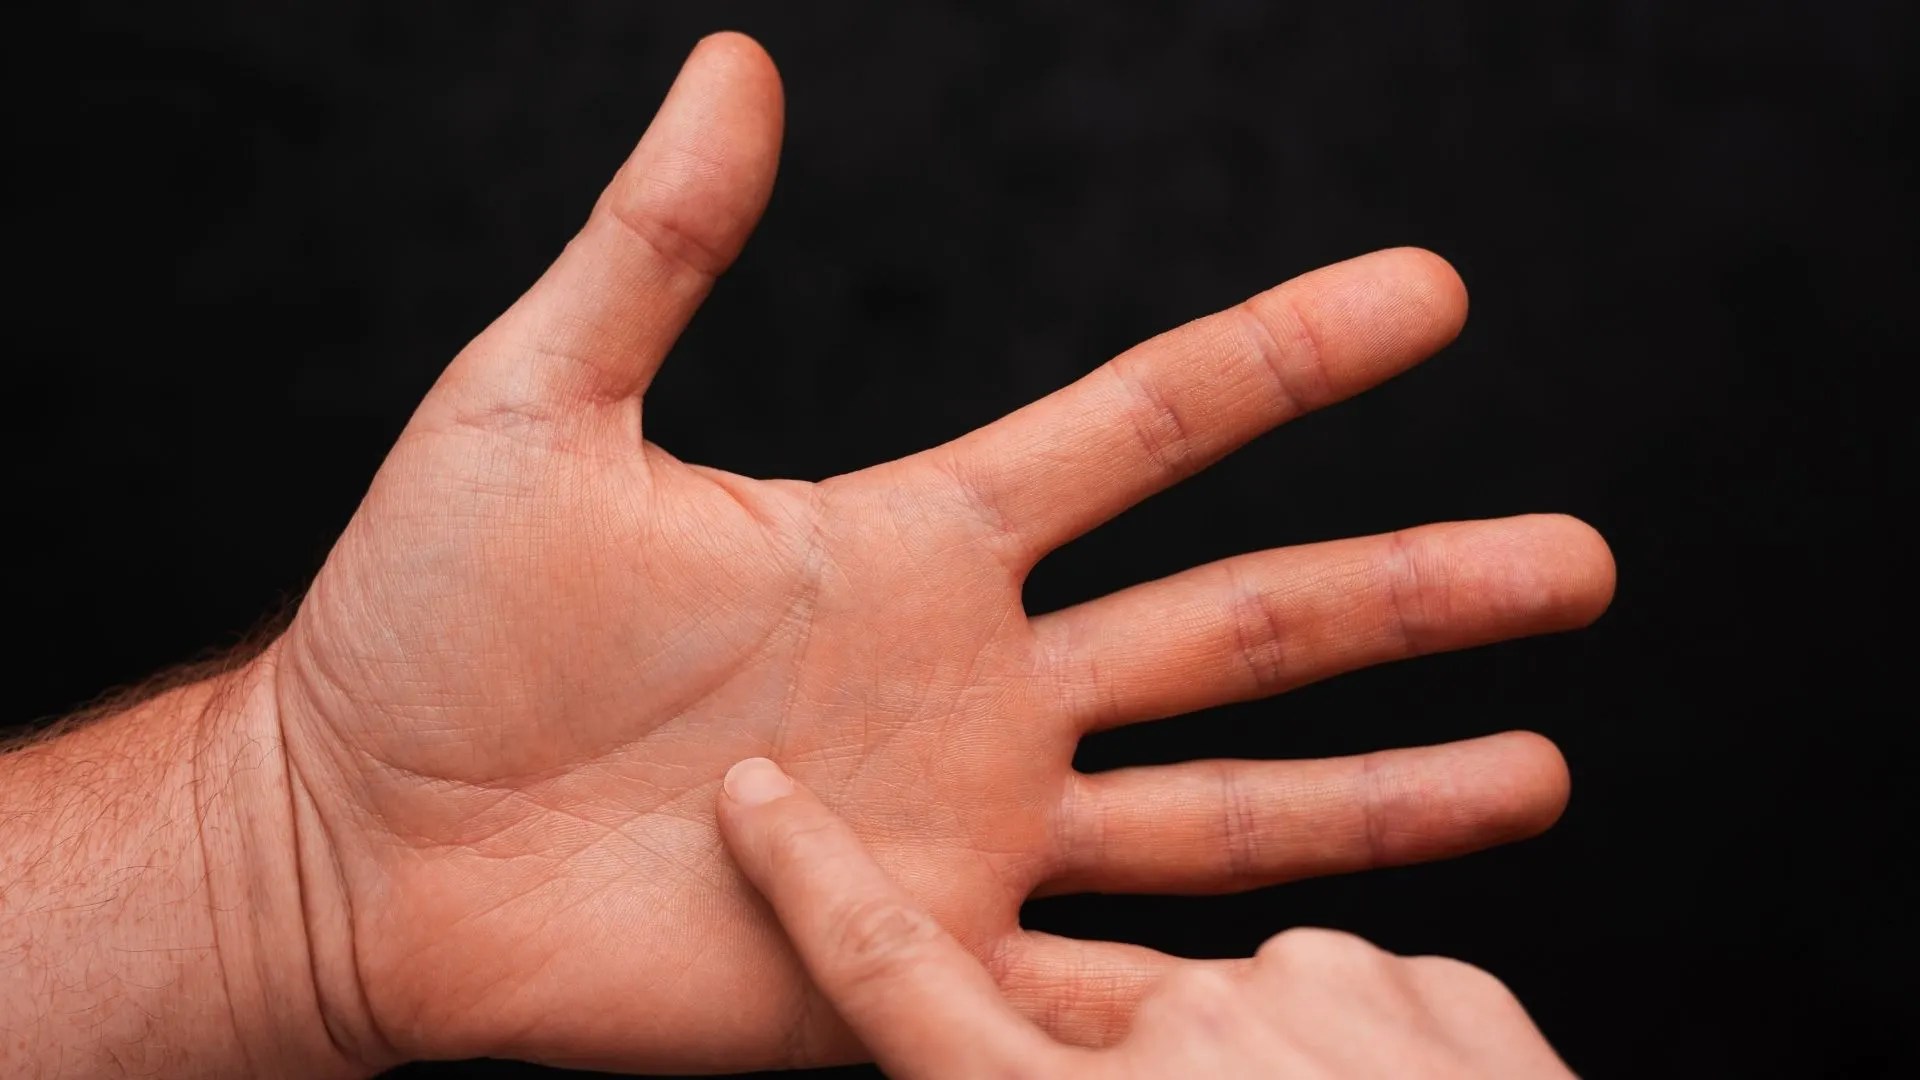 How does a successful person's palm look like? - Quora